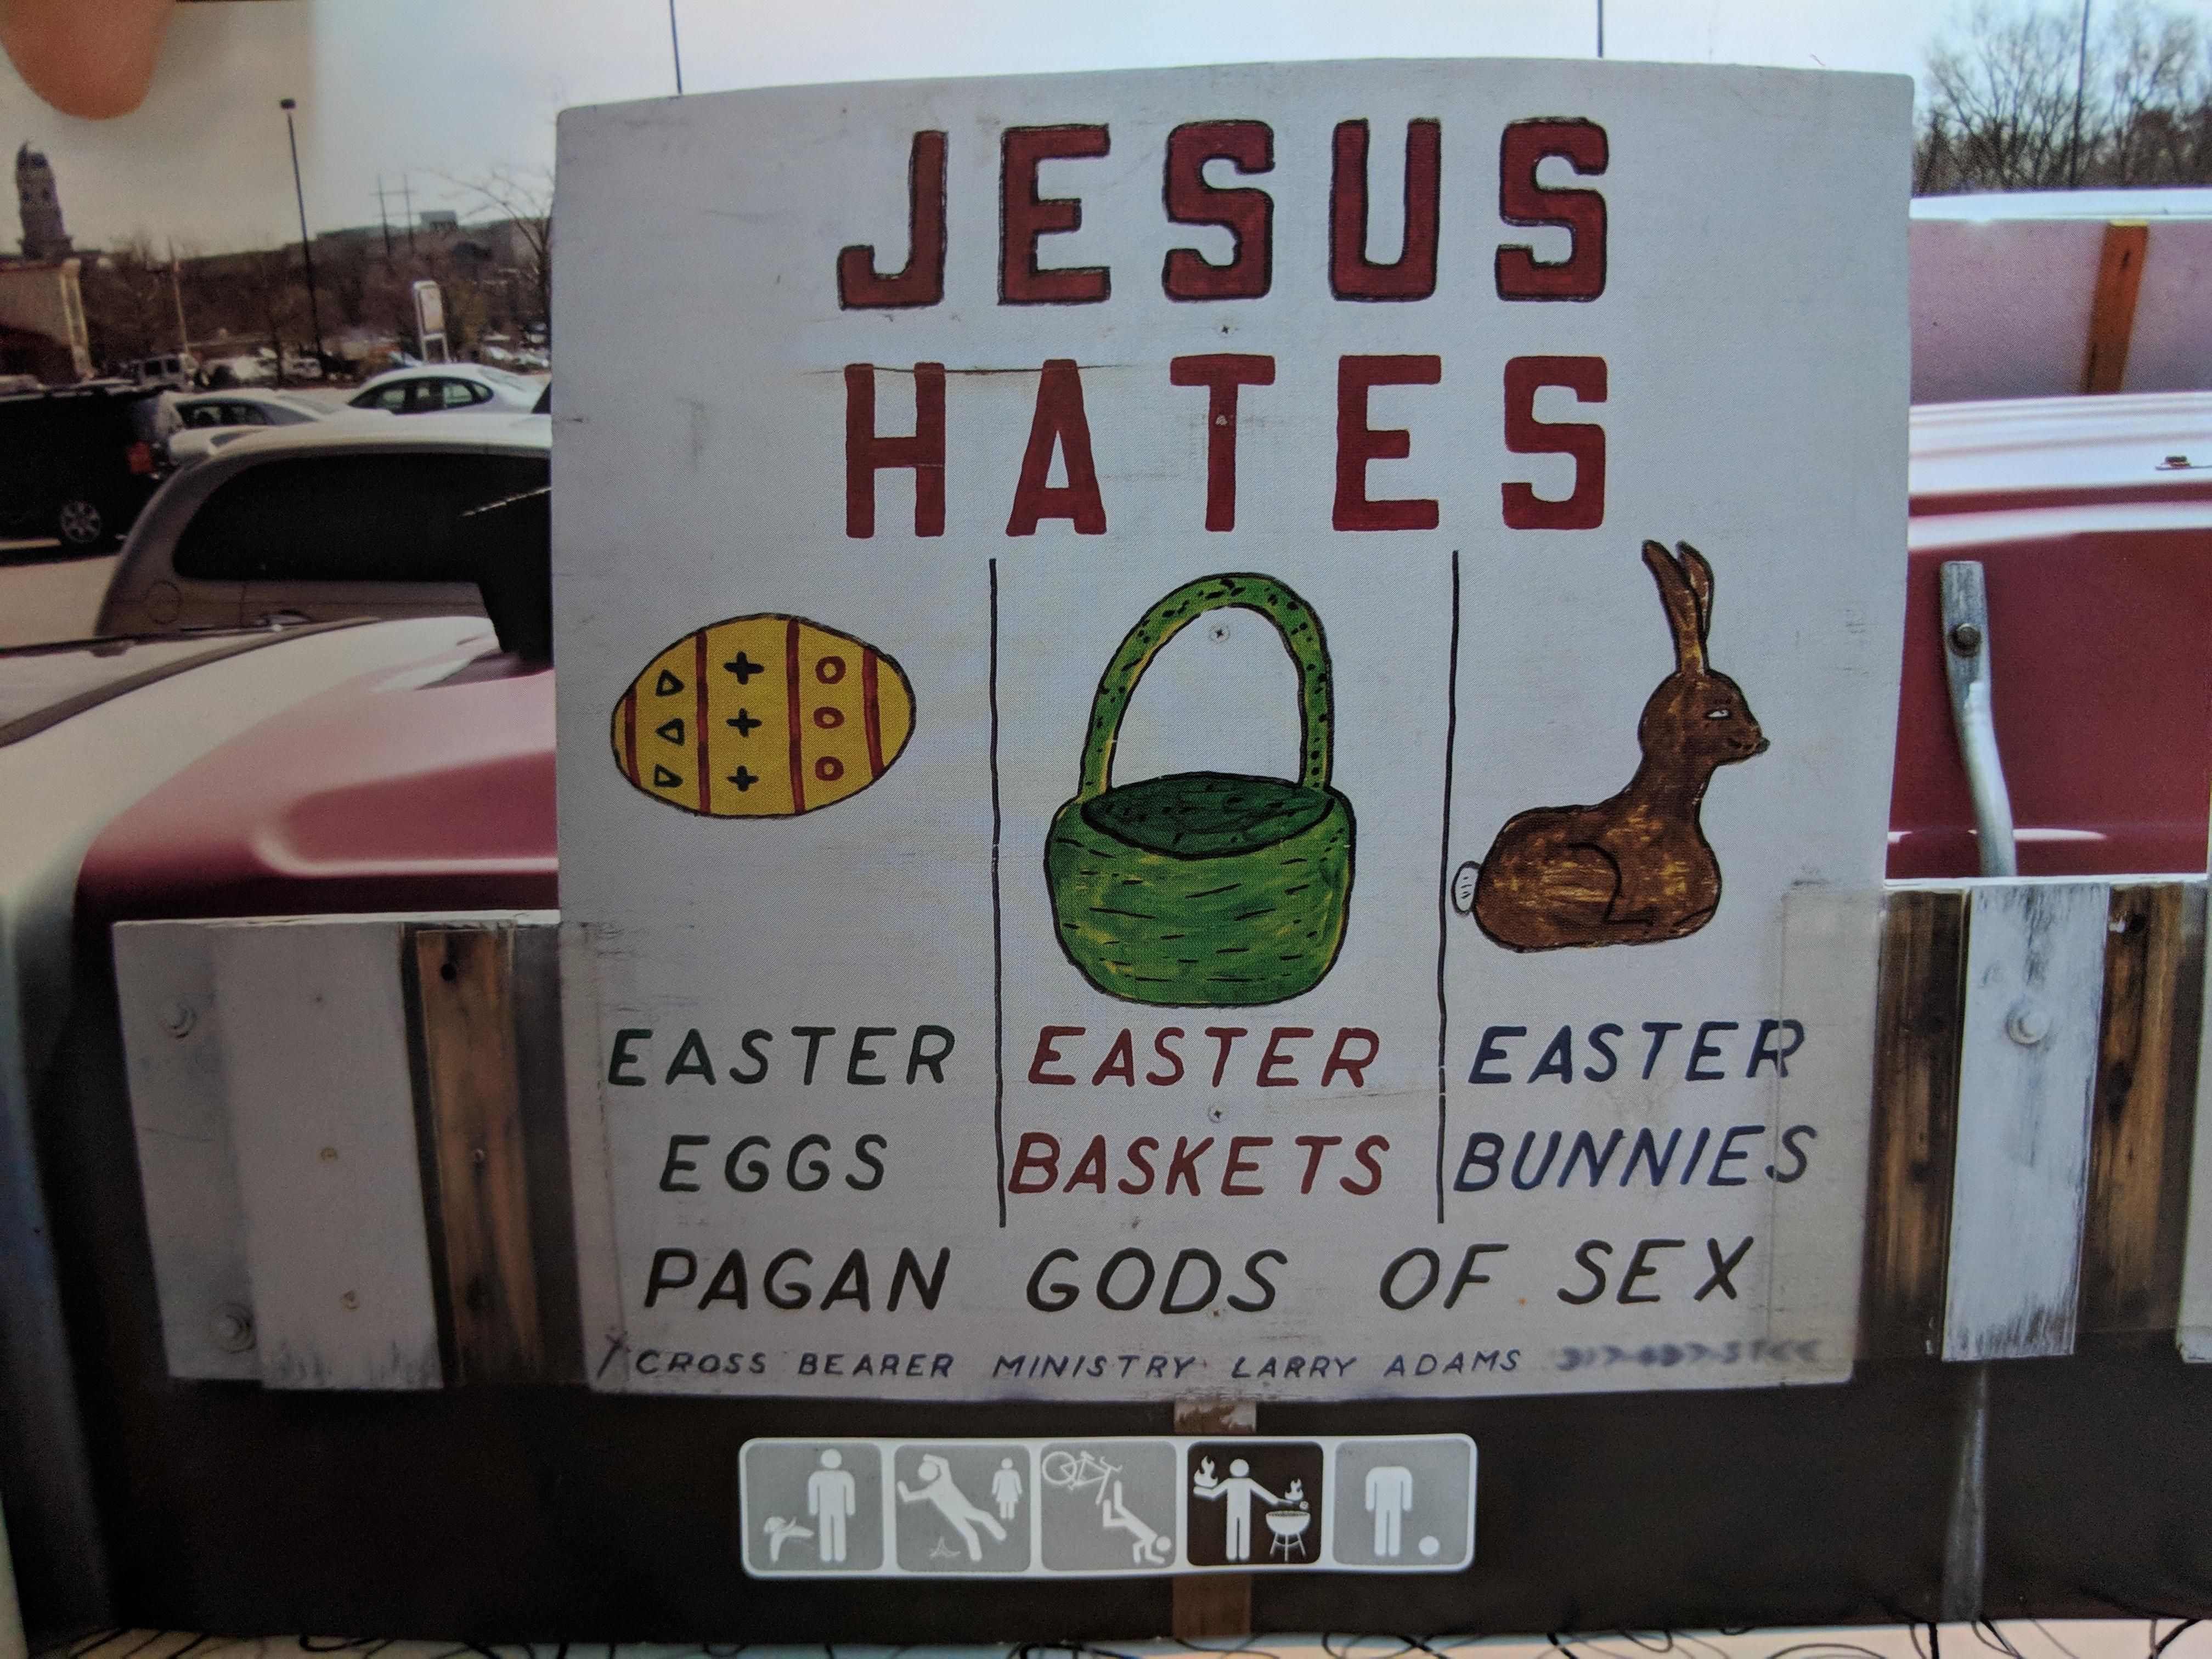 Pagan Gods of Sex is my new band name.